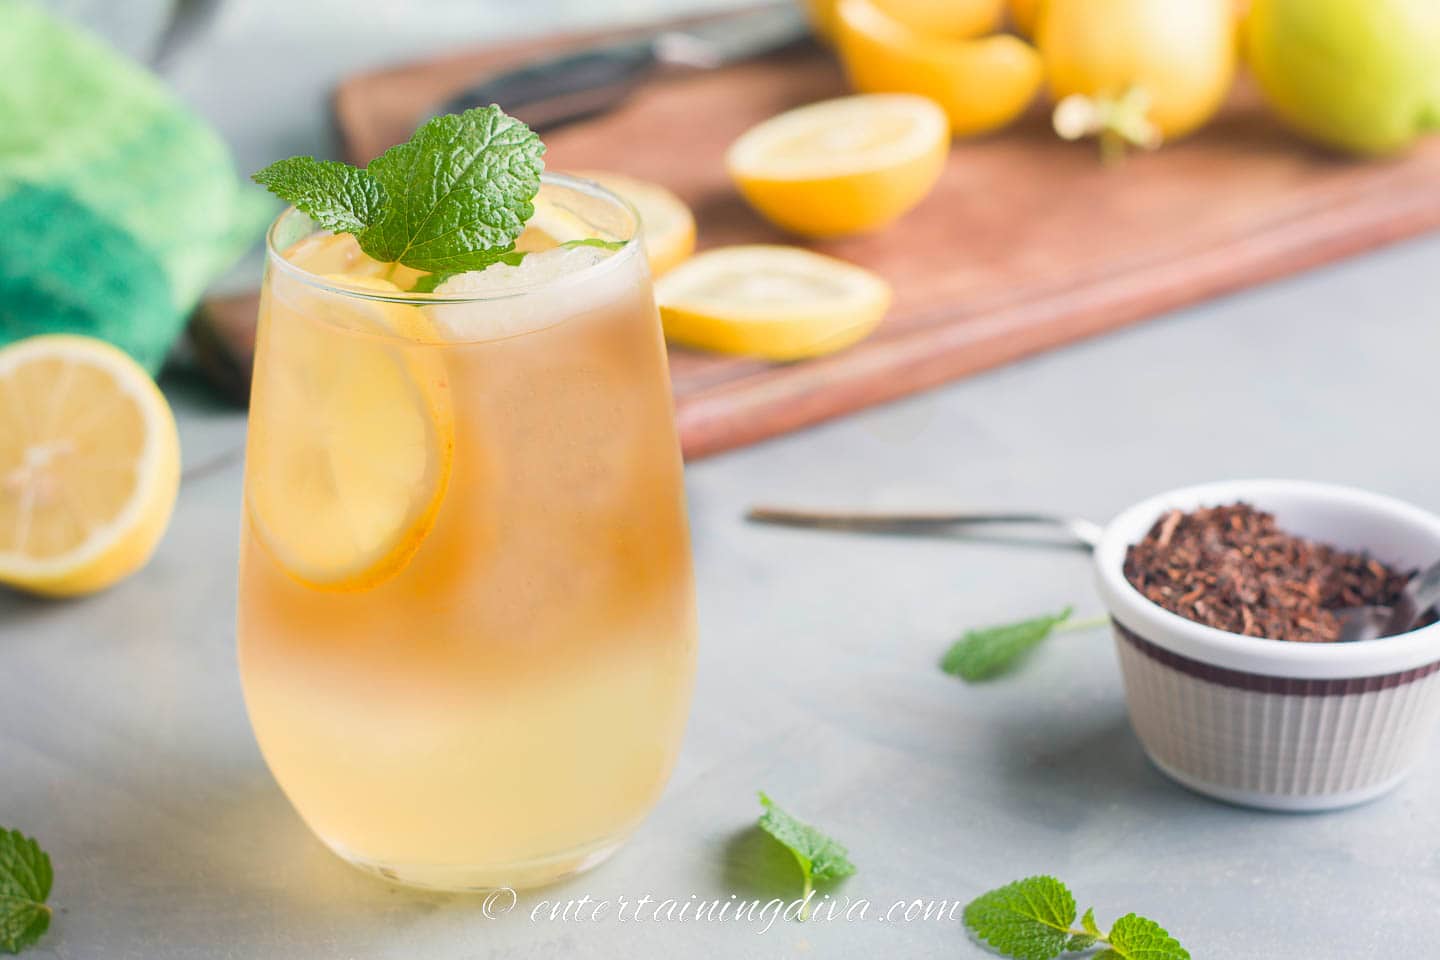 glass of iced tea with a lemon slice and sprig of fresh mint as a garnish